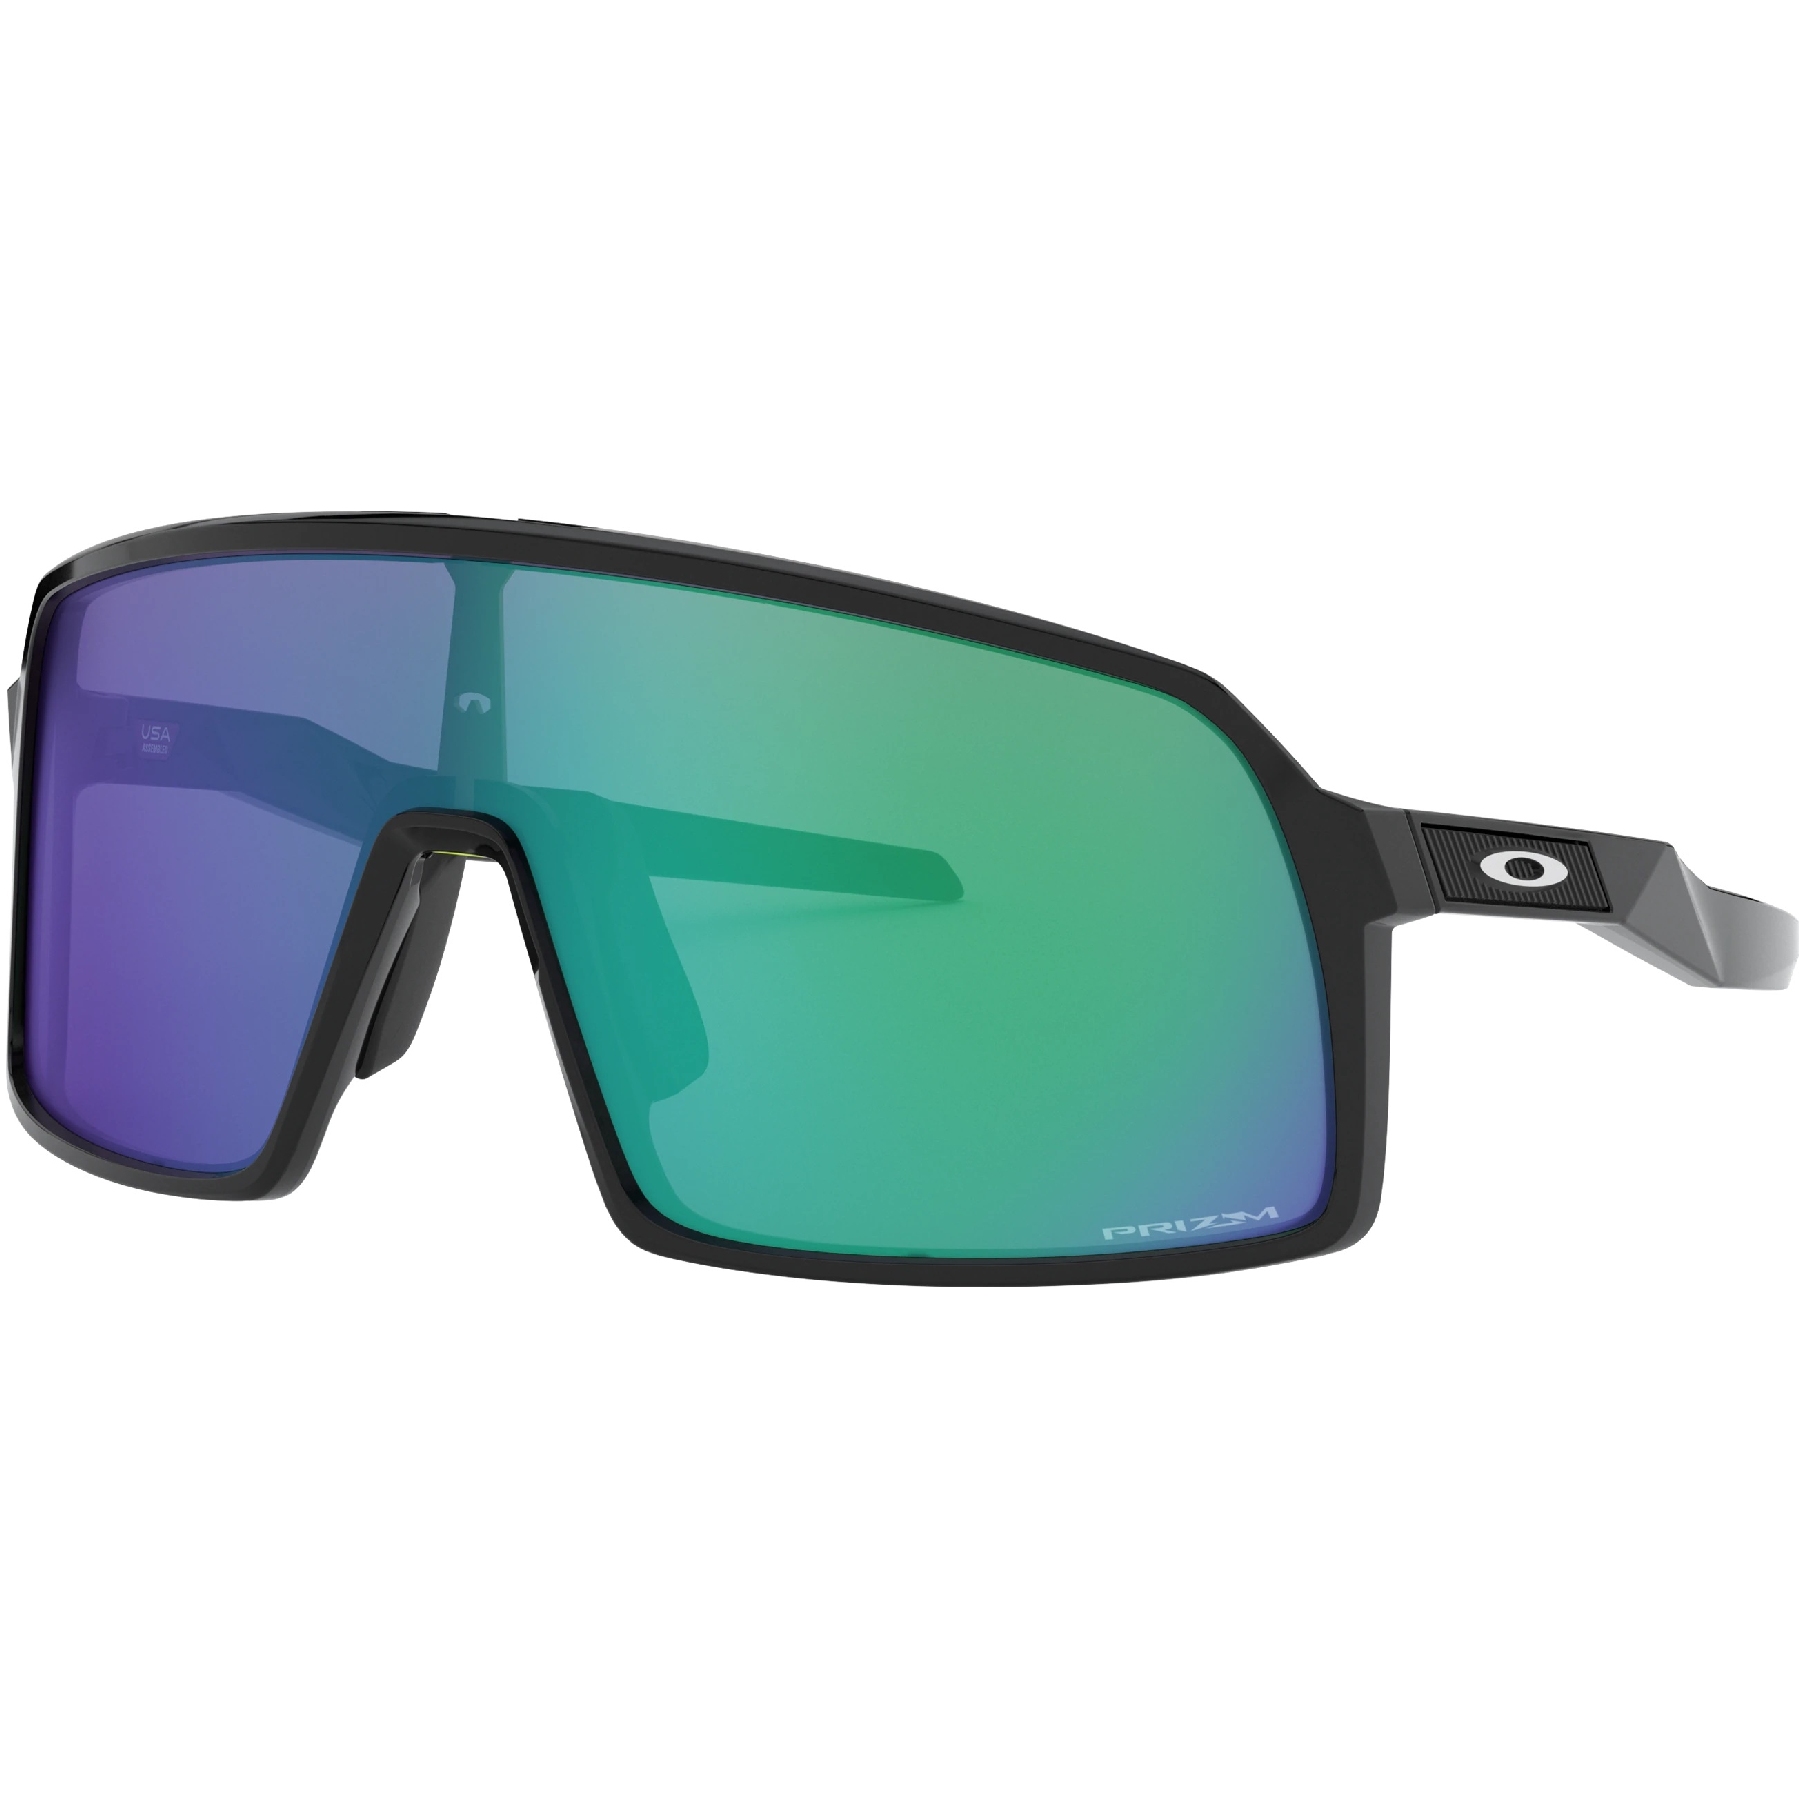 Picture of Oakley Sutro S Glasses - Polished Black/Prizm Jade - OO9462-0628